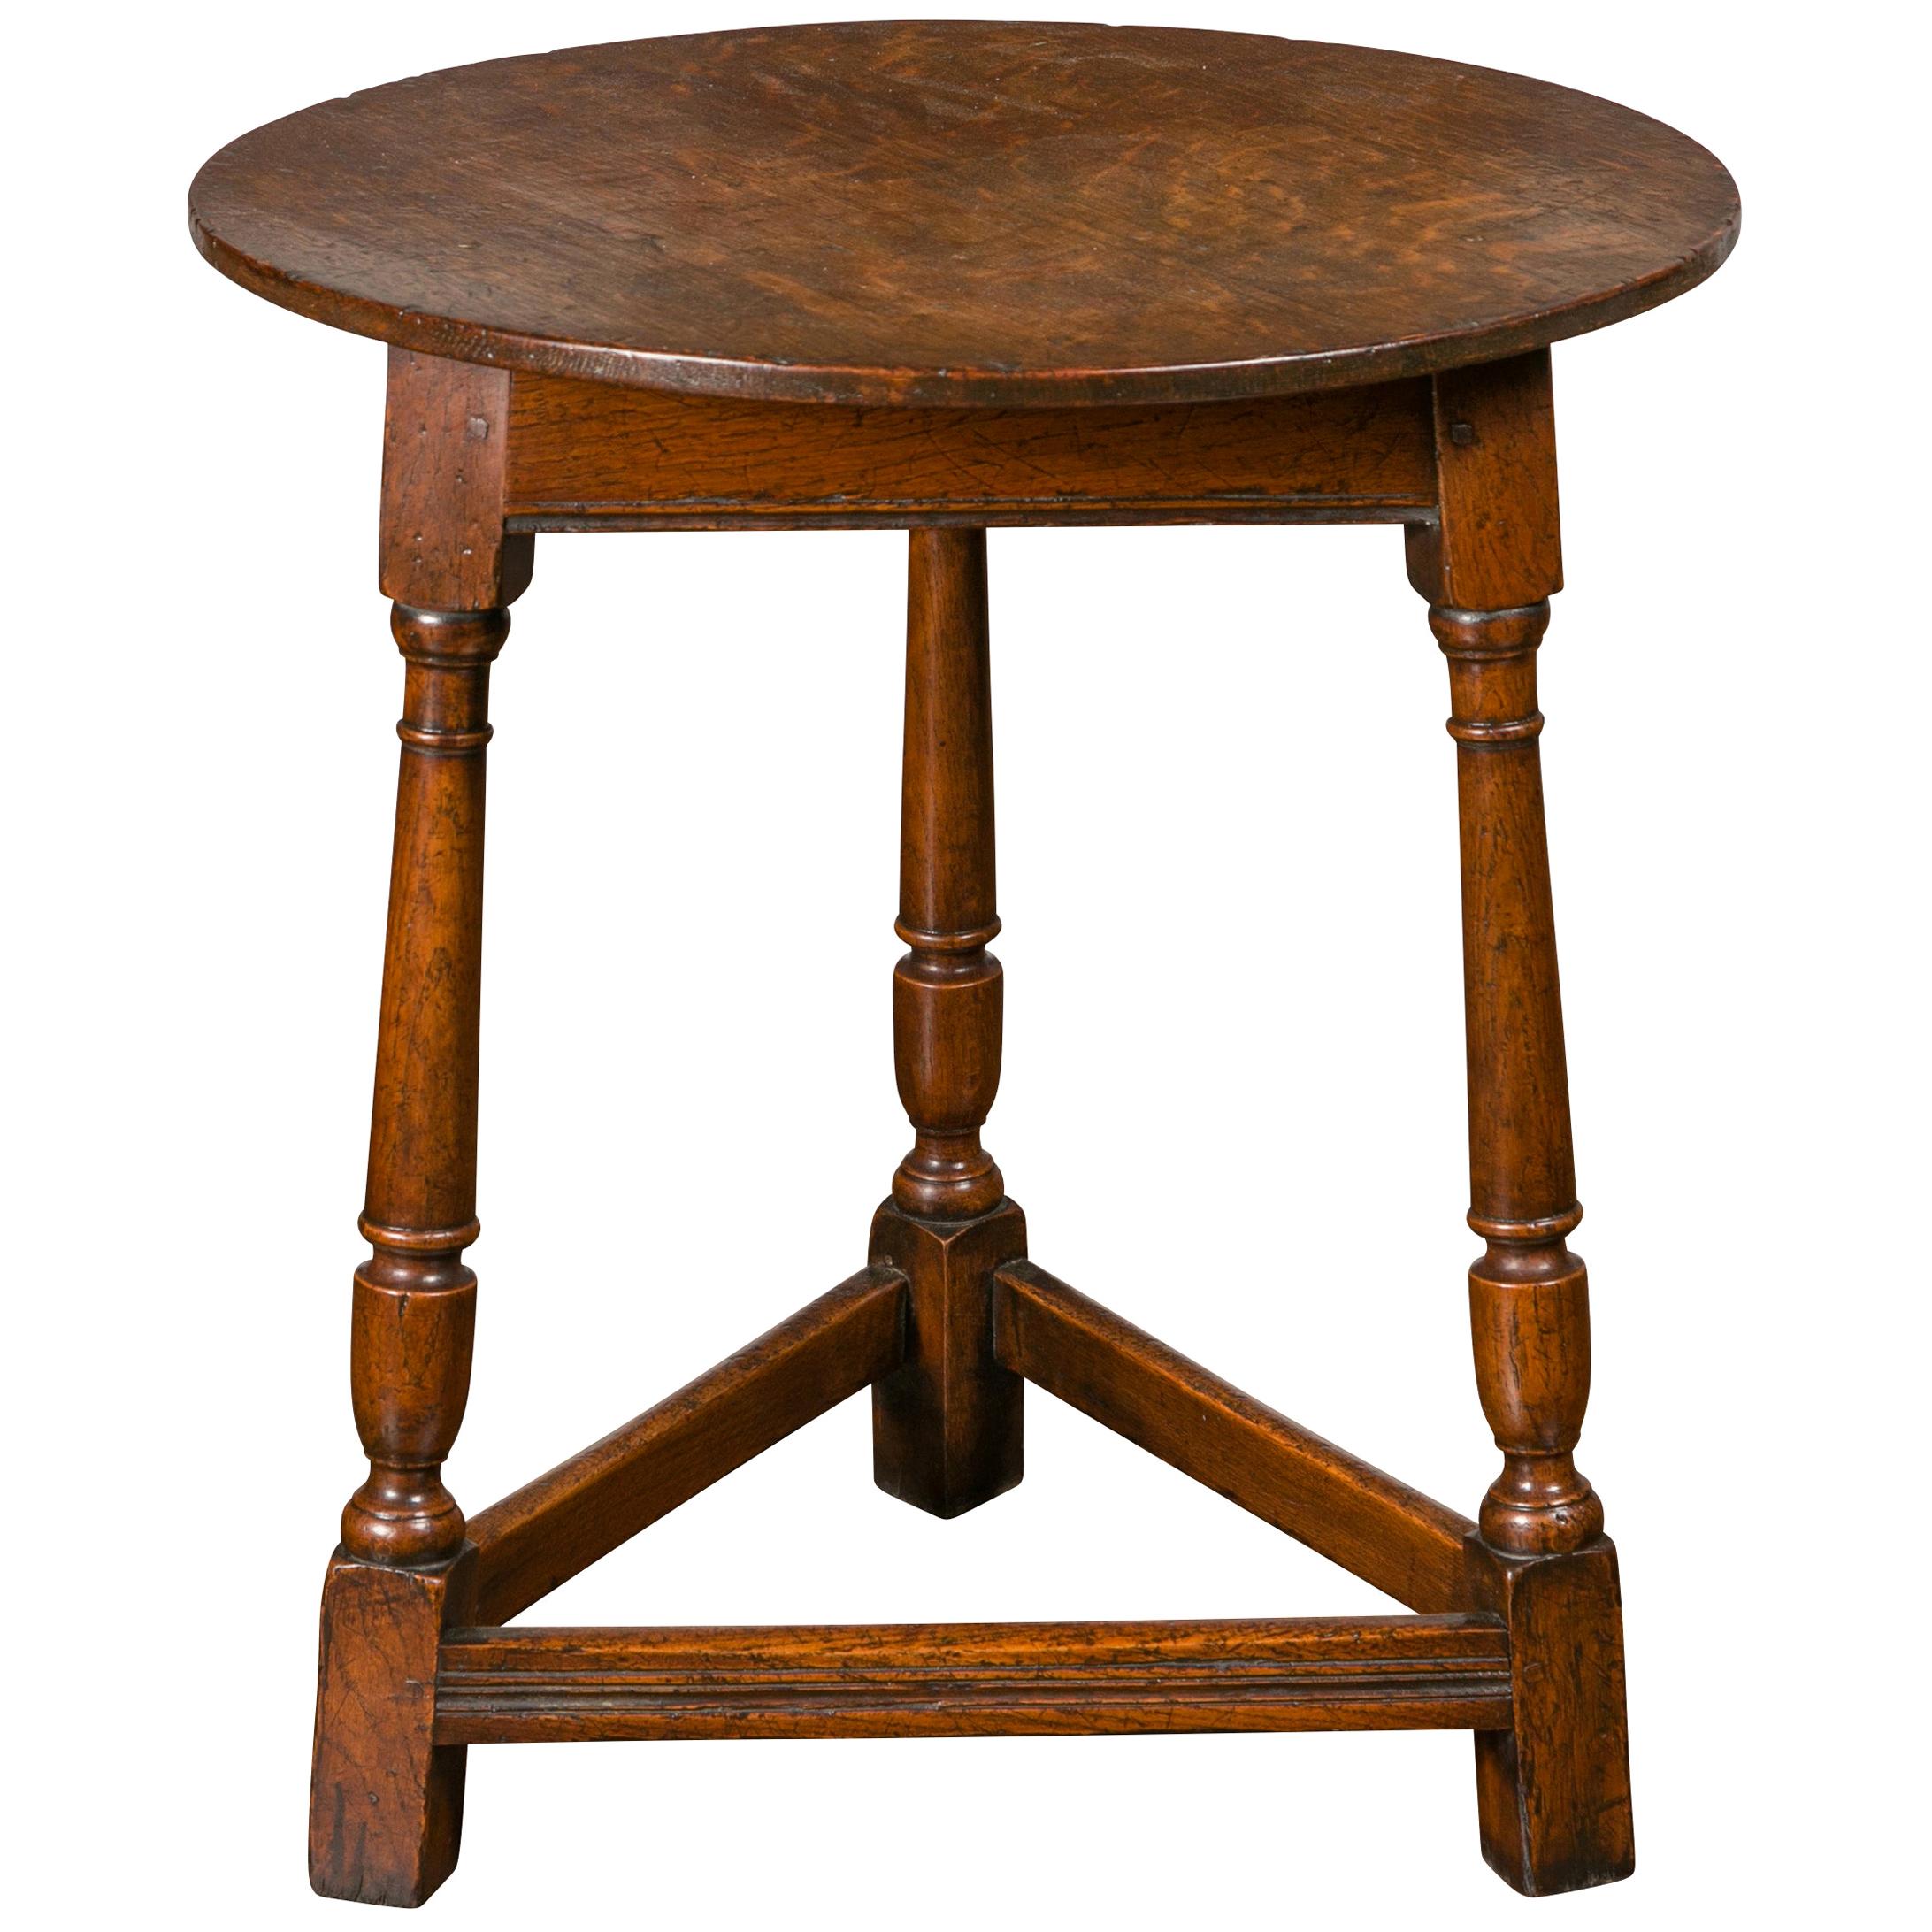 English 1840s Oak Cricket Table with Circular Top, Turned Legs and Stretchers